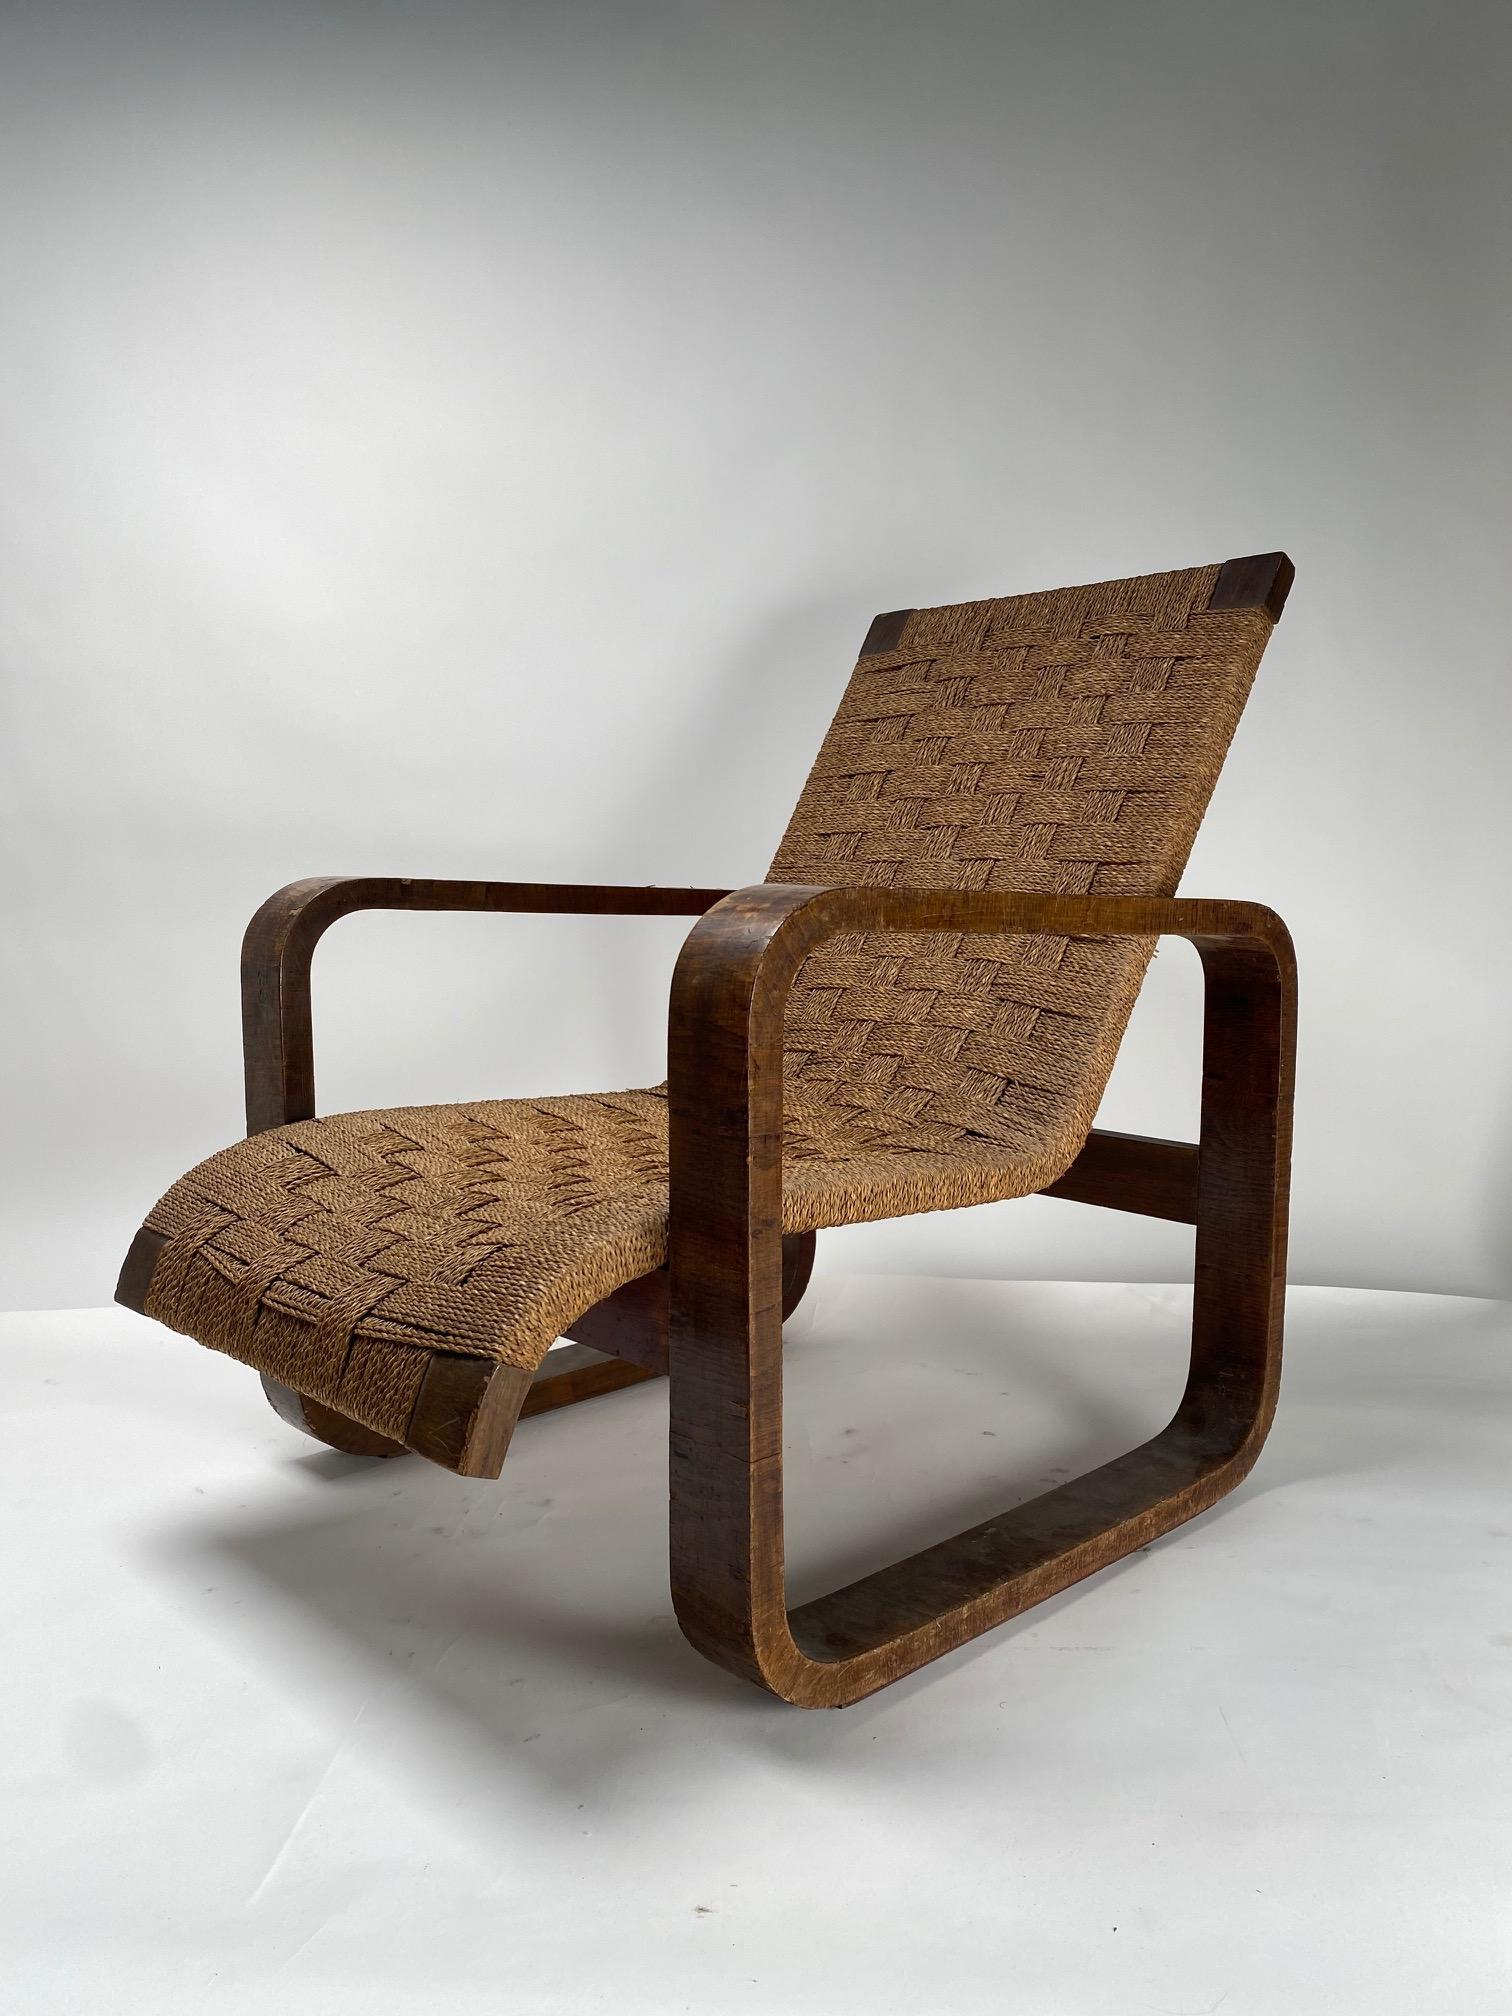 Sculptural Armchair in wood and rope, Giuseppe Pagano (Attr), Italy, 1940s For Sale 2